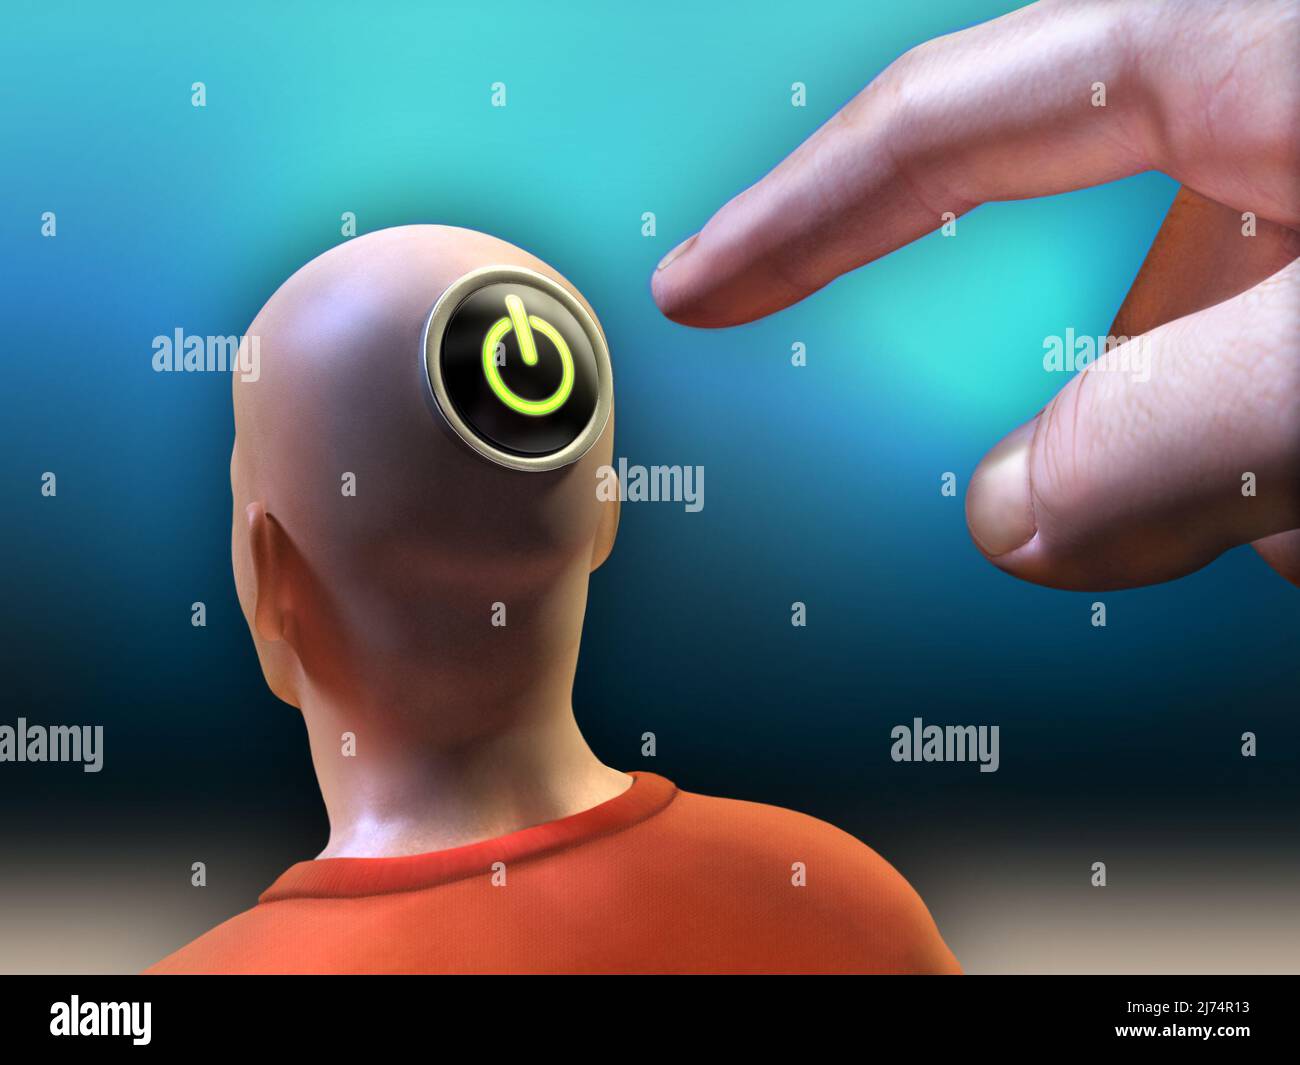 Hand is pushing a power button located on the head of a man. Inclueded clipping path to separate main objects from background. Digital illustration. Stock Photo